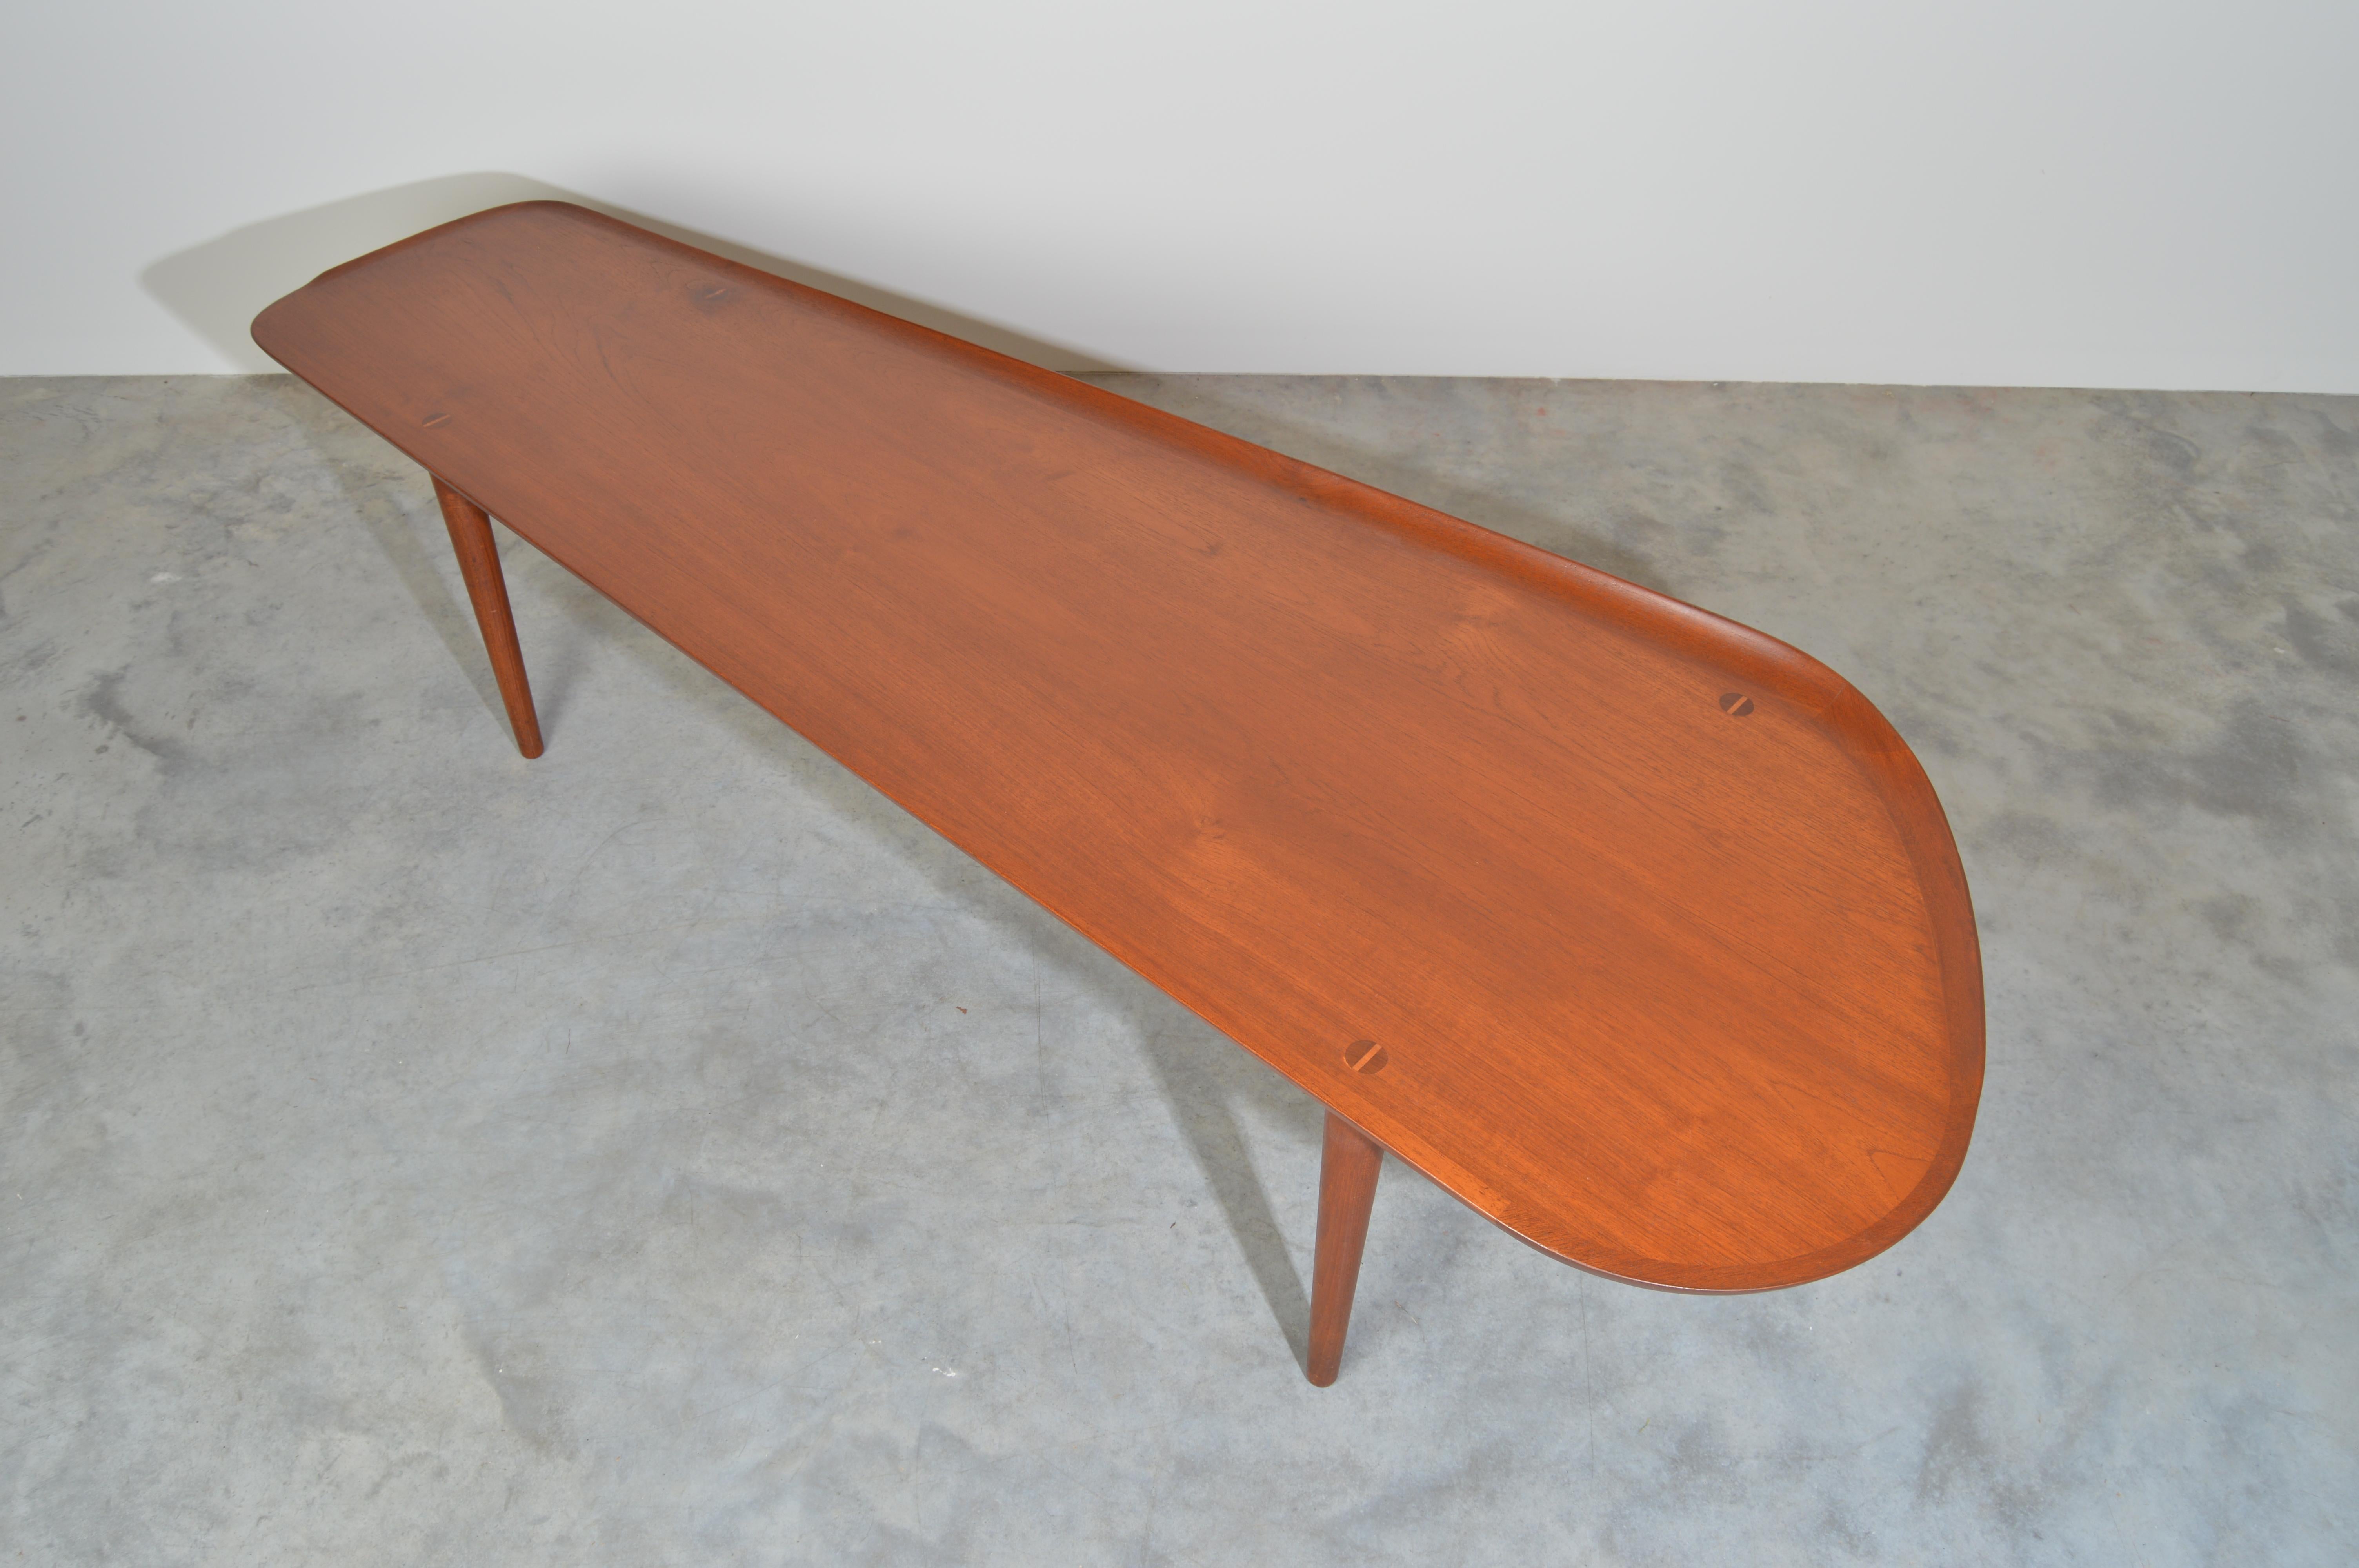 Long teak coffee table having a sculptural edge designed by Arne Hovmand-Olsen for Jutex.
Fabulous vintage condition. Professionally cleaned and finished. Signed with foil label underneath.
Measures: Length 6’ widest width 24.5” narrow width